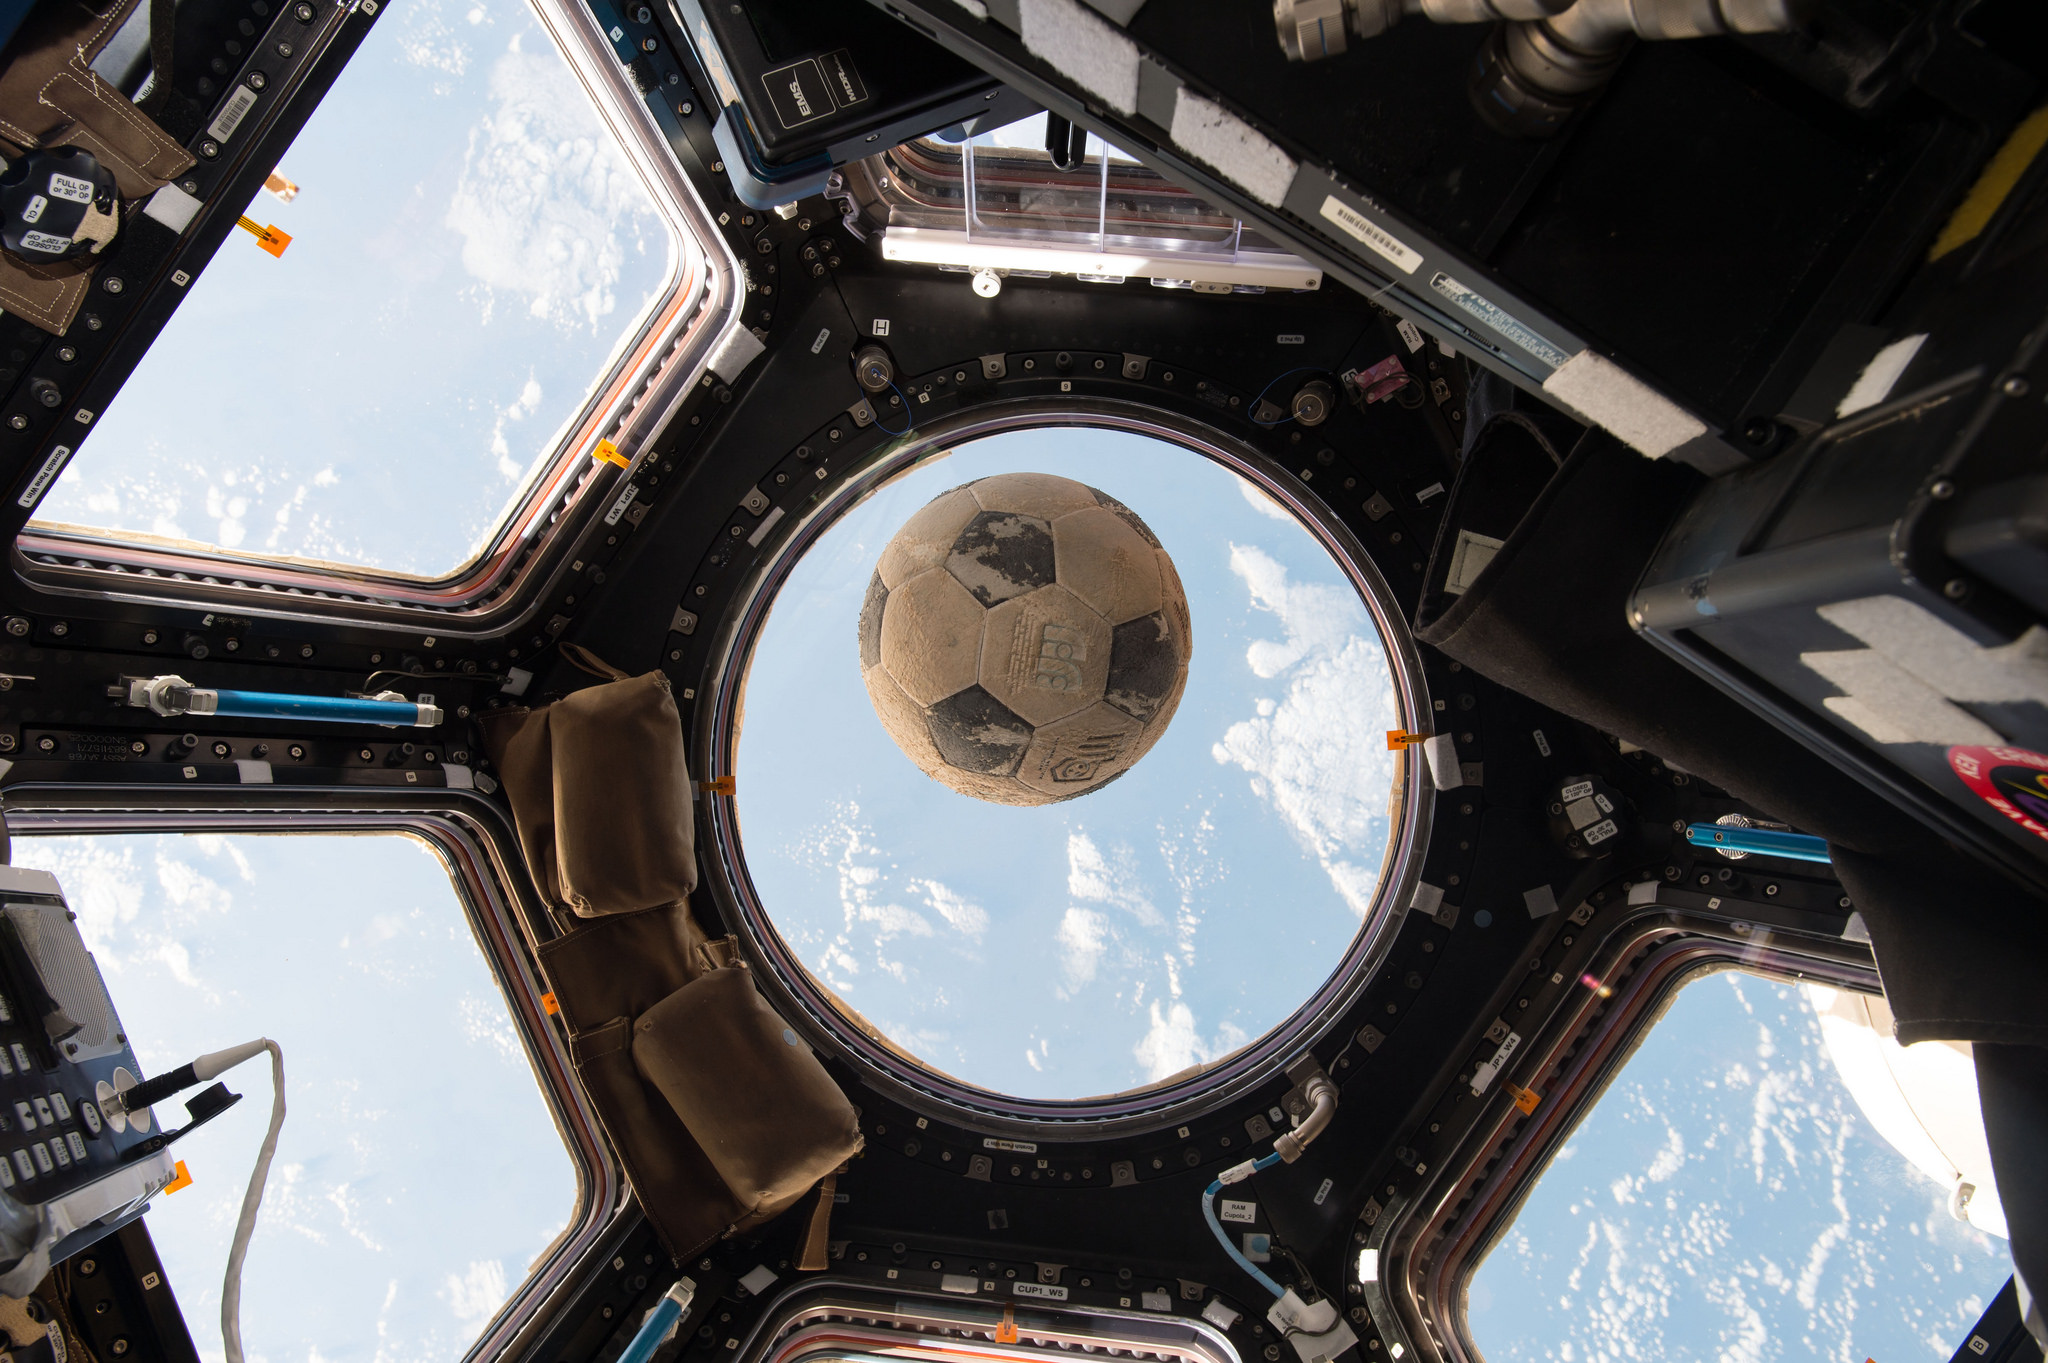 Astronaut Shane Kimbrough took this photo of the Challenger soccer ball floating in front of the ISS's cupola window to mark NASA's day of remembrance for the Challenger disaster. Image: NASA